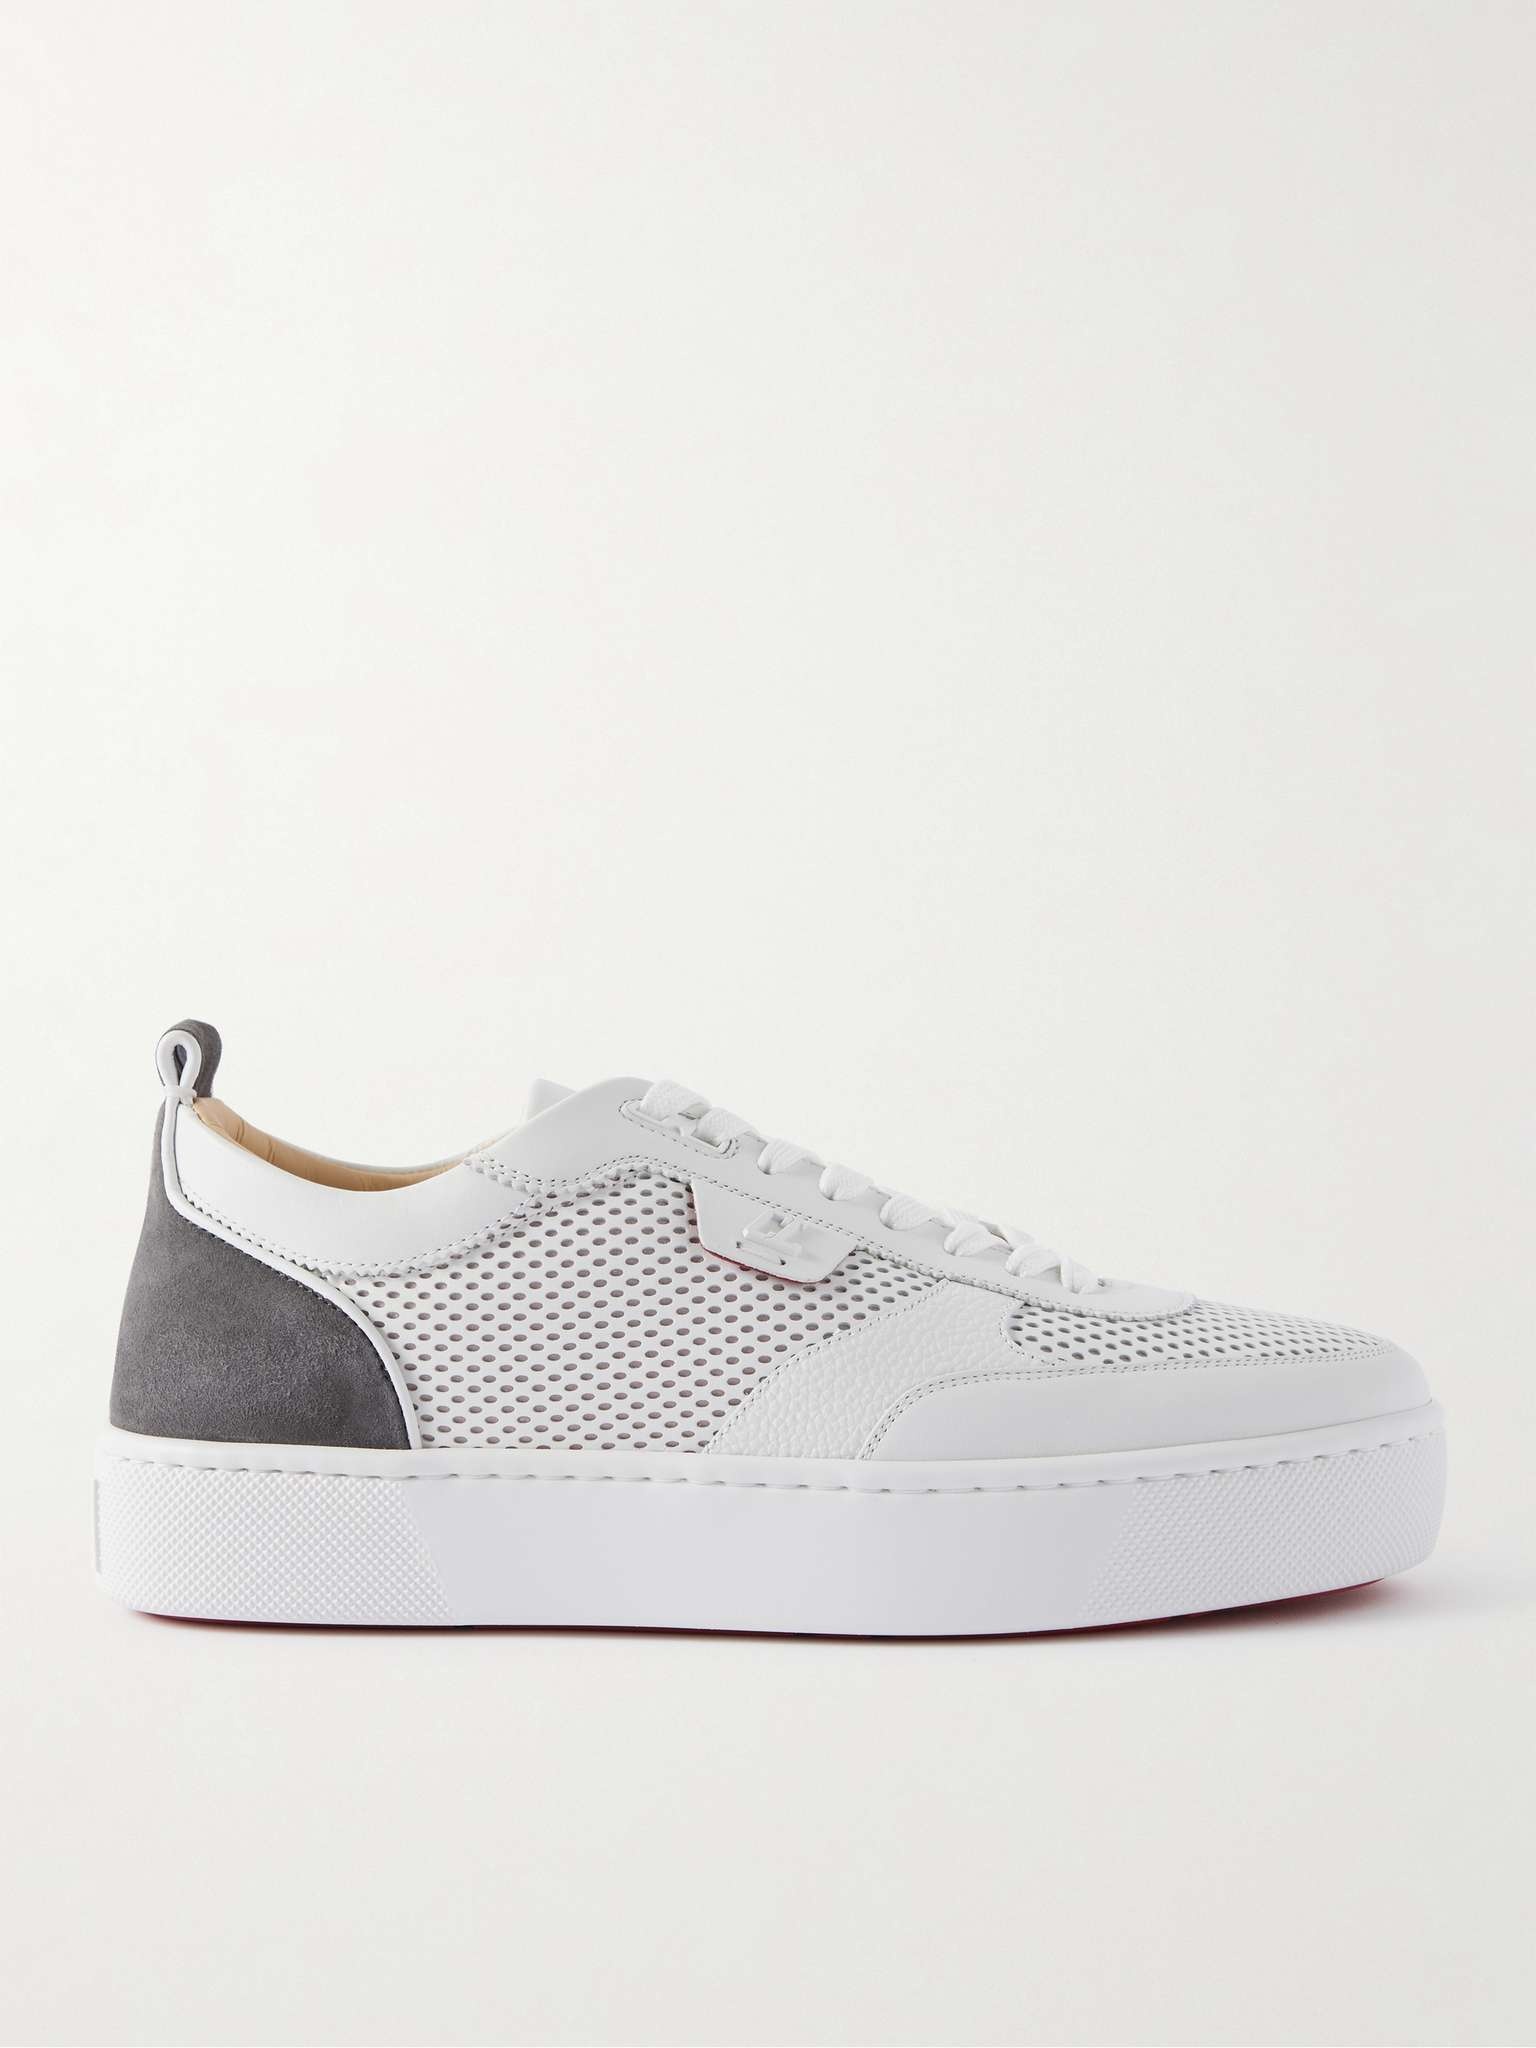 Happyrui Suede-Trimmed Perforated Leather Sneakers - 1